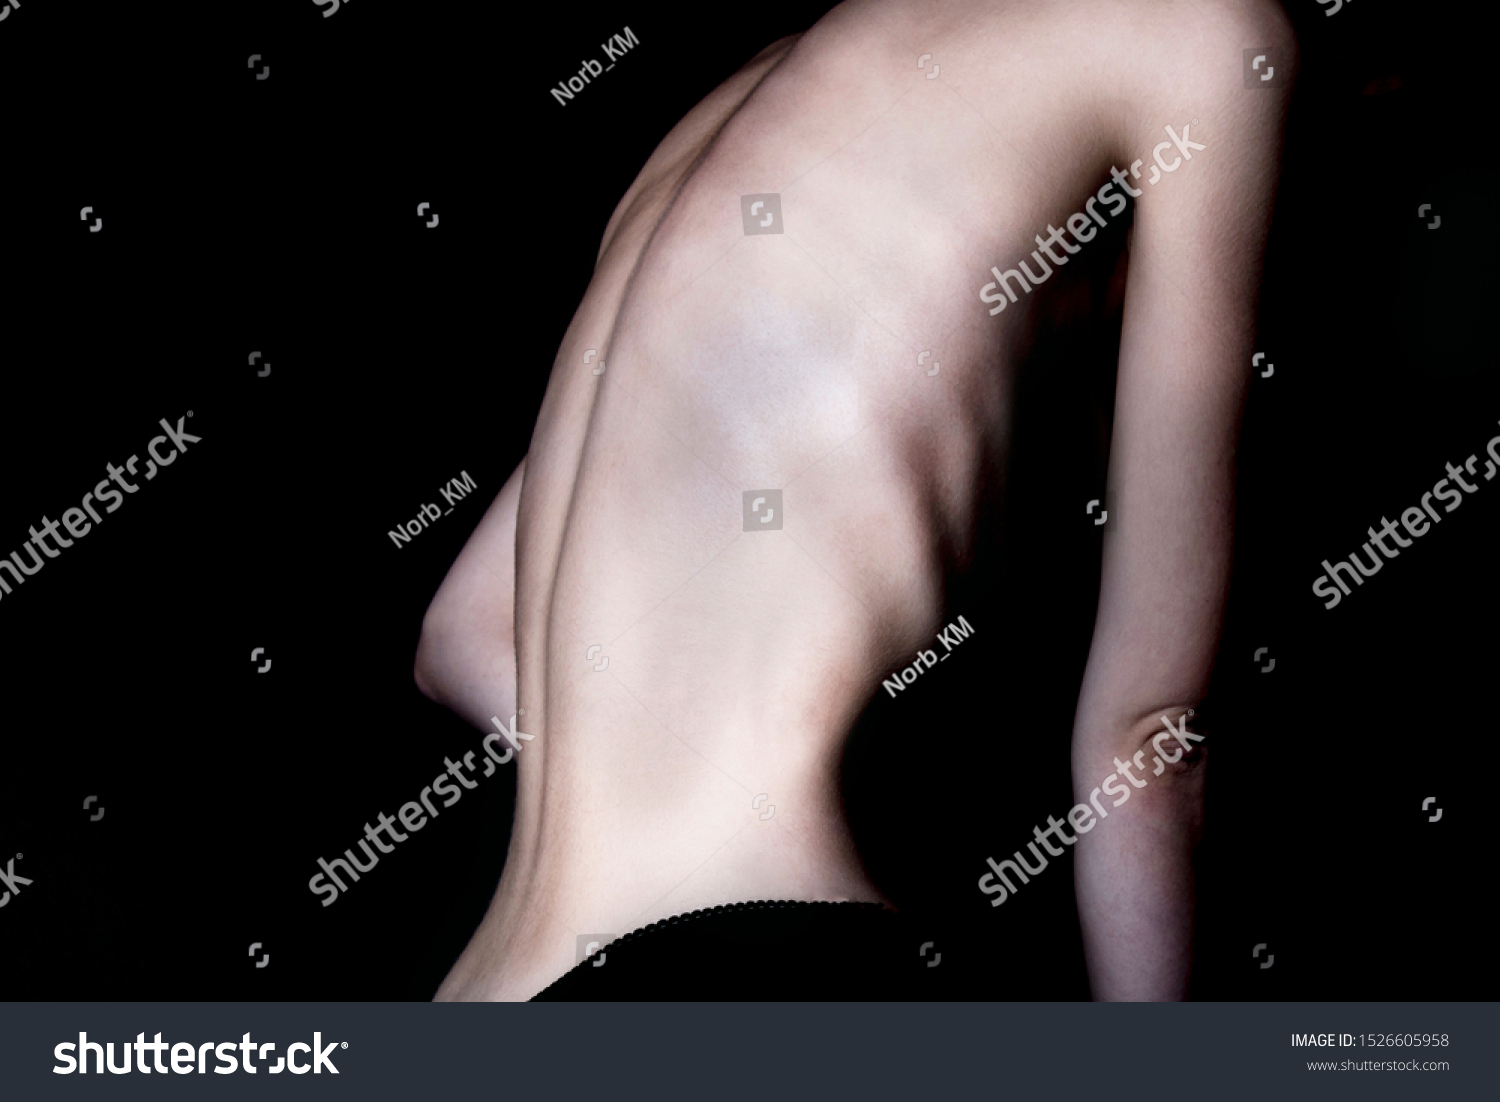 A girl with anorexia turned back, spine and ribs visible. Toned in cold tones for dramatic effect. #1526605958